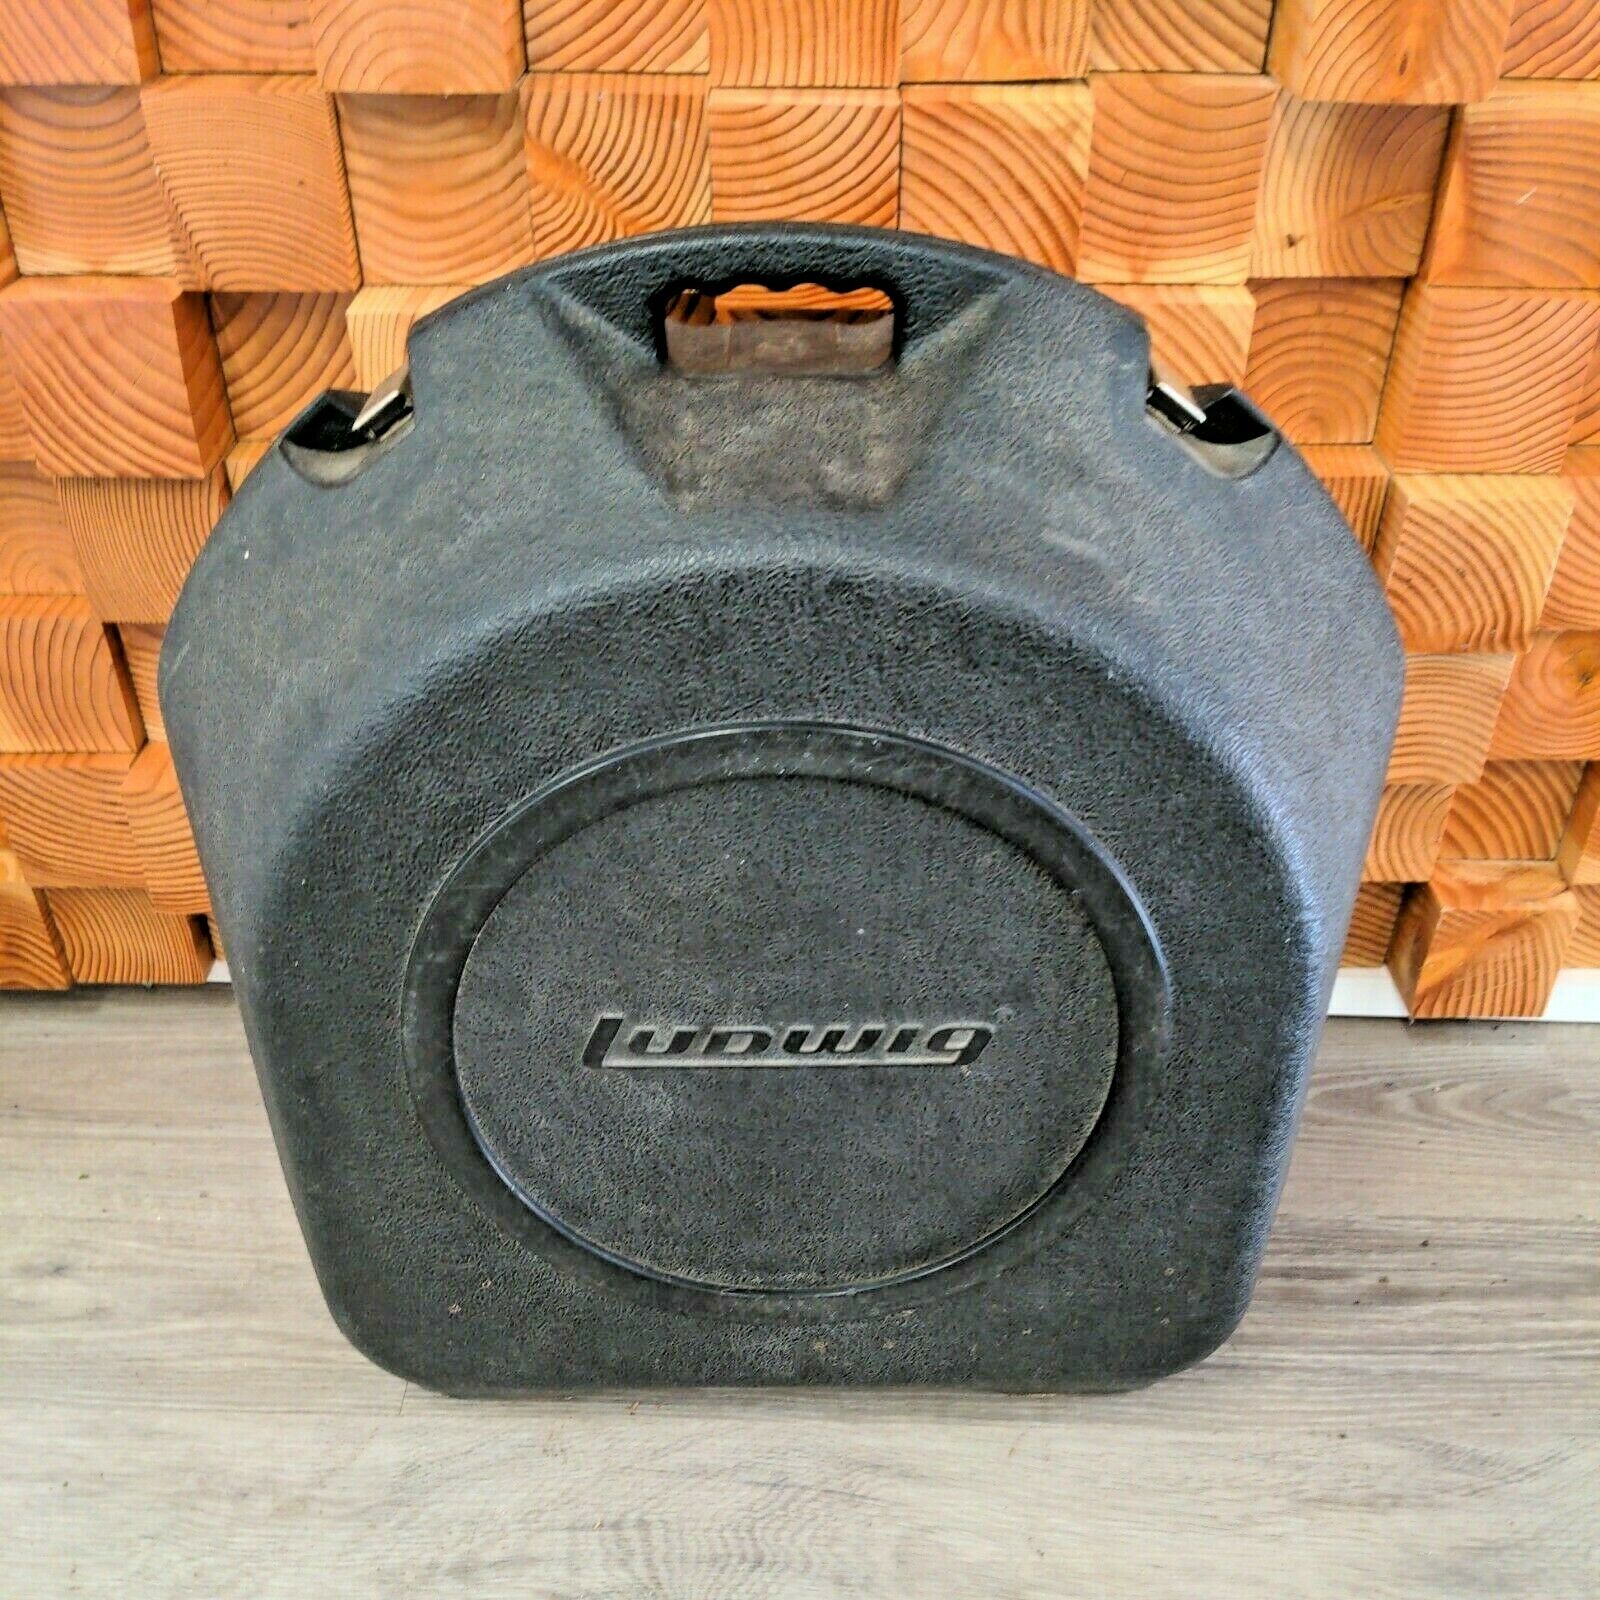 Vintage Ludwig Hard Clamshell Snare Drum Case